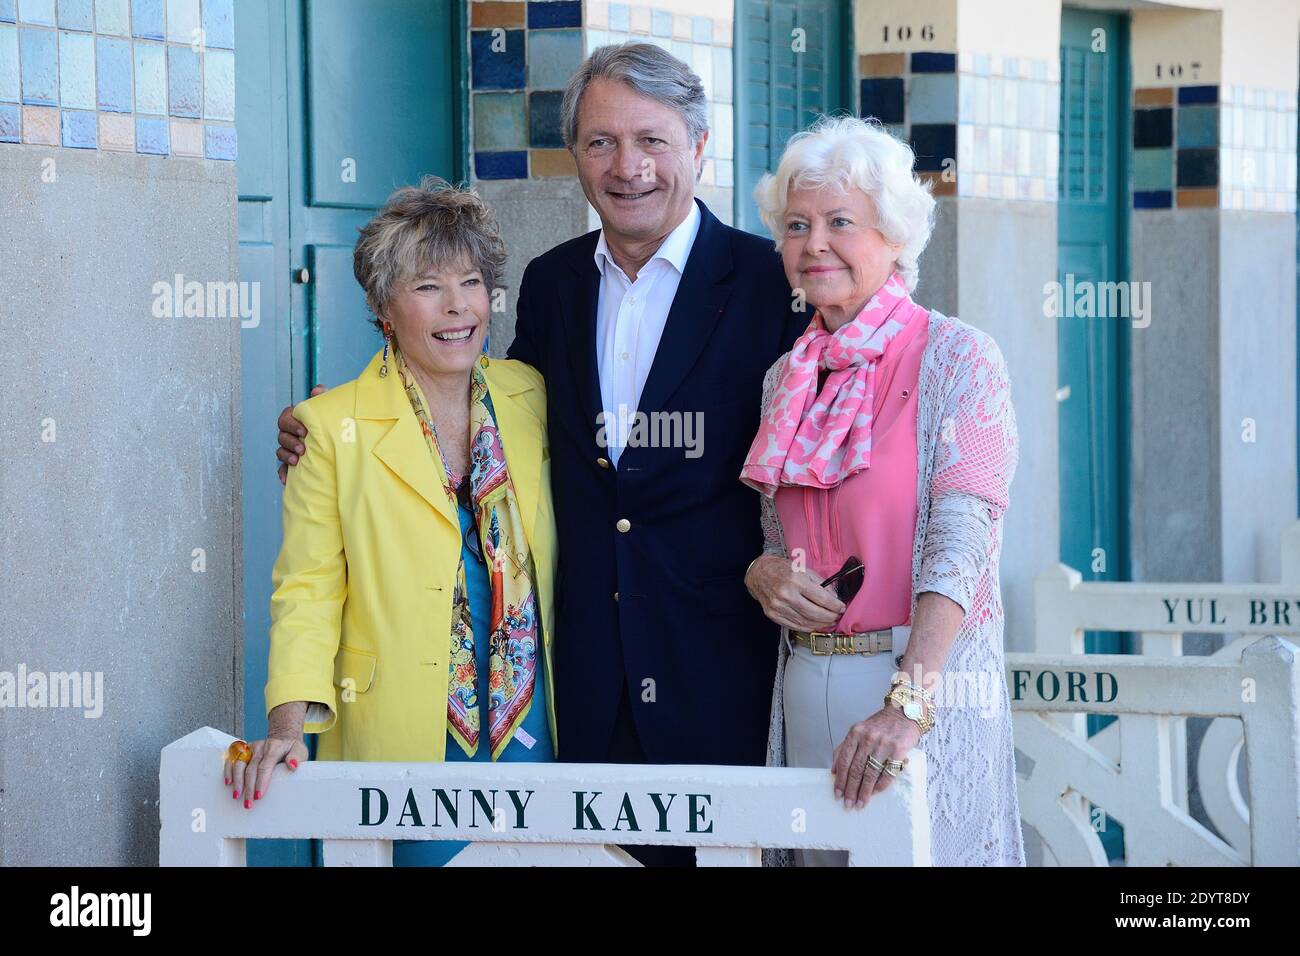 Dena Kaye posing with Deauville's Mayor Philippe Augier and Anne d'Ornano during a tribute for her father Danny Kaye during the 39th Deauville American Film Festival in Deauville, France on September 4, 2013. Photo by Nicolas Briquet/ABACAPRESS.COM Stock Photo